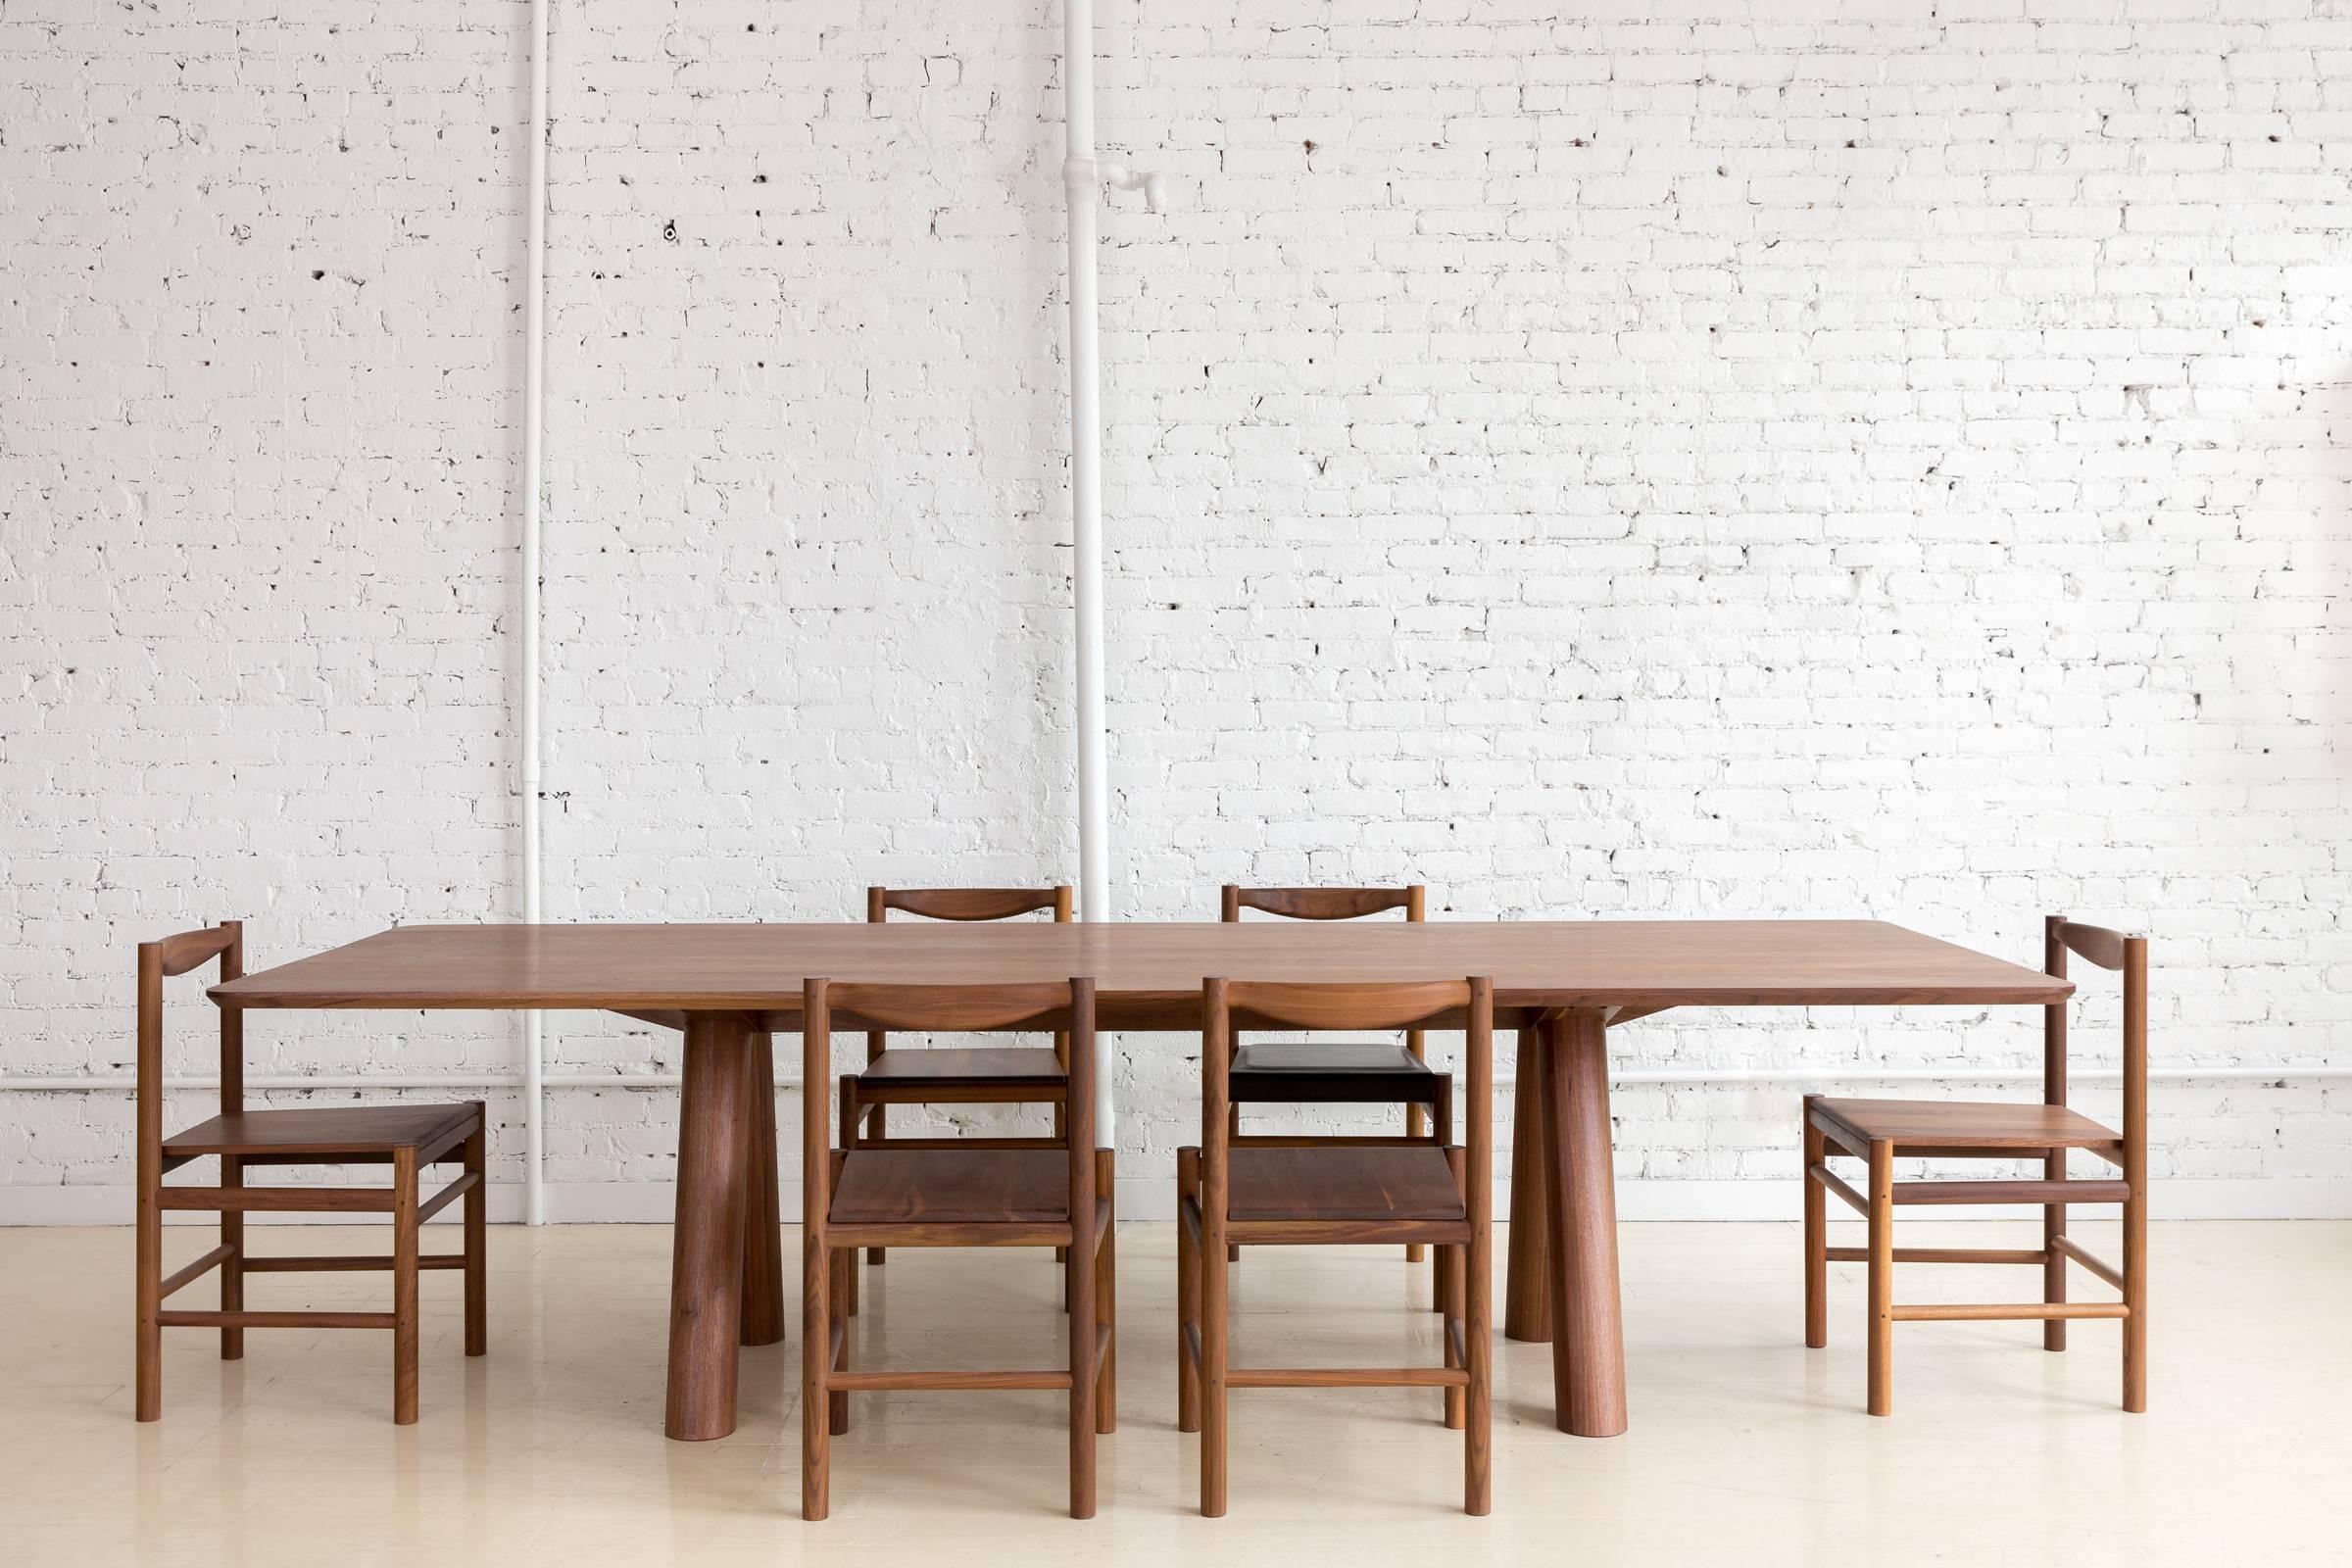 This contemporary, minimal walnut dining table produced in 2017 features large diameter legs and a bold trestle to give rise to an elegant hardwood top. Top includes rounded corners with an optional underside bevel to compliment details found on the